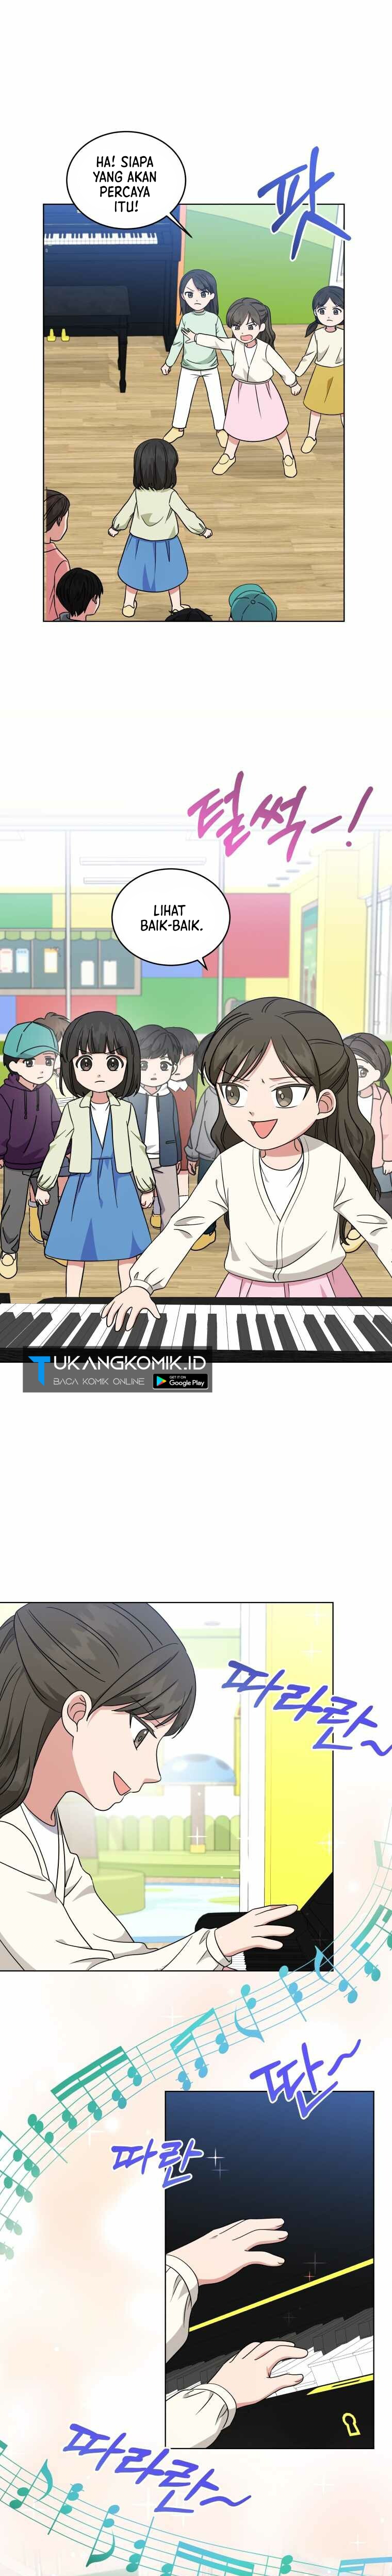 My Daughter is Music Genius Chapter 40 Image 3